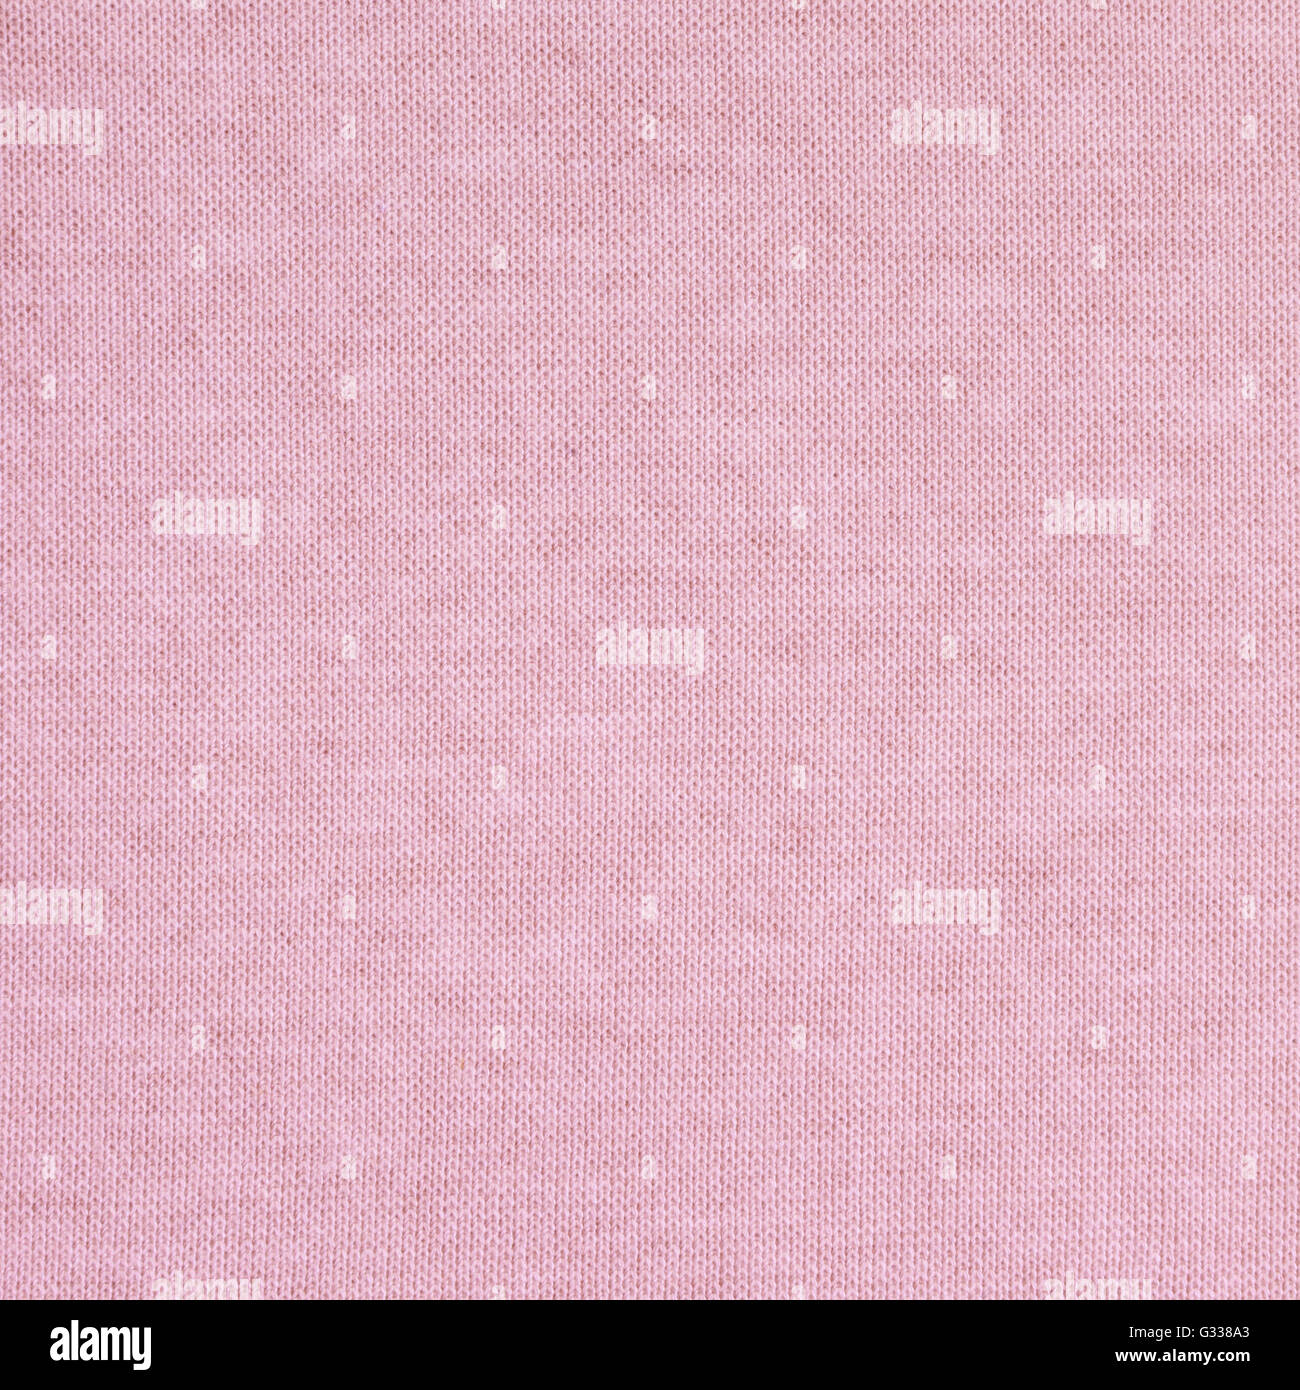 Pale pink knitted fabric texture. Close up fragment of the top view. Stock Photo